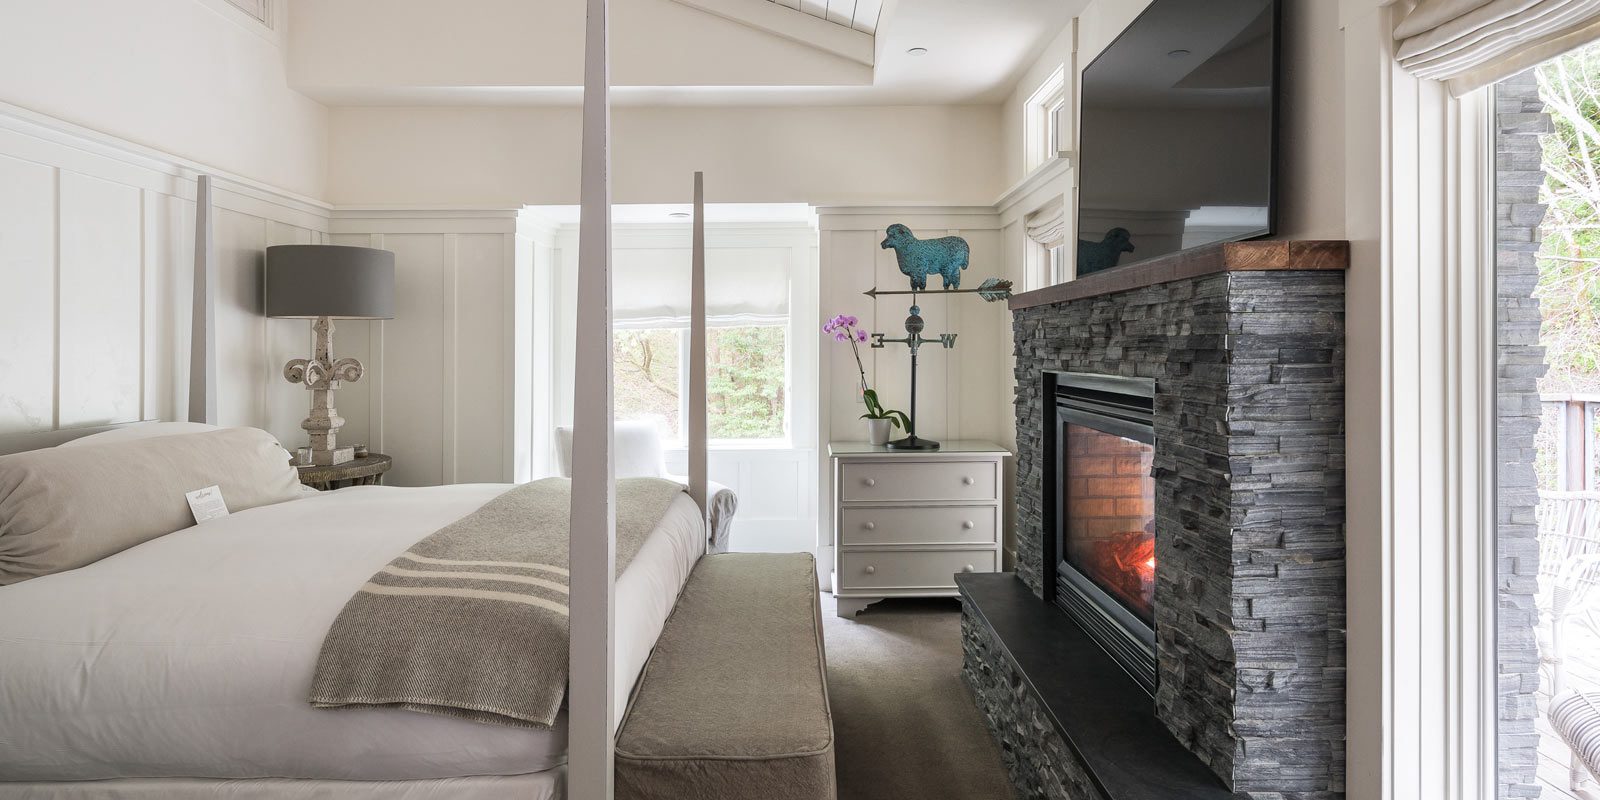 Interior of Barn One Bedroom Suite: side view of large bed with white bedding and plaid folded blanket at foot of bed. On the right is a dark stone gas fireplace with flatscreen TV over it. There is a large glass door on the back wall.